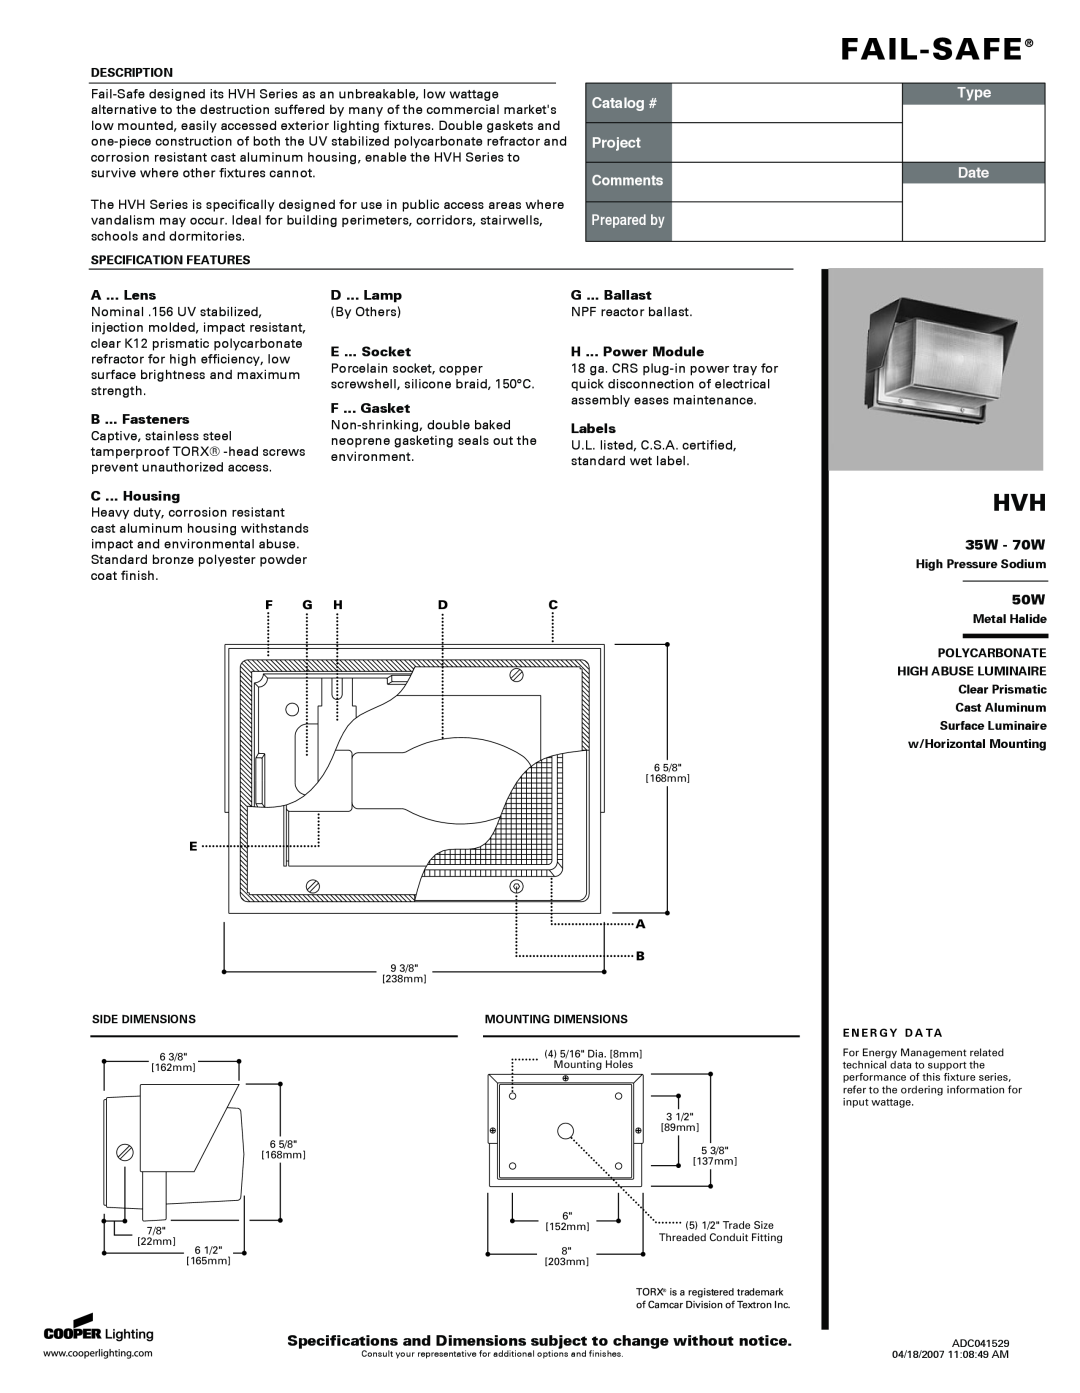 Cooper Lighting HVH specifications 35W - 70W, A ... Lens, B ... Fasteners, C ... Housing, D ... Lamp, E ... Socket, Labels 